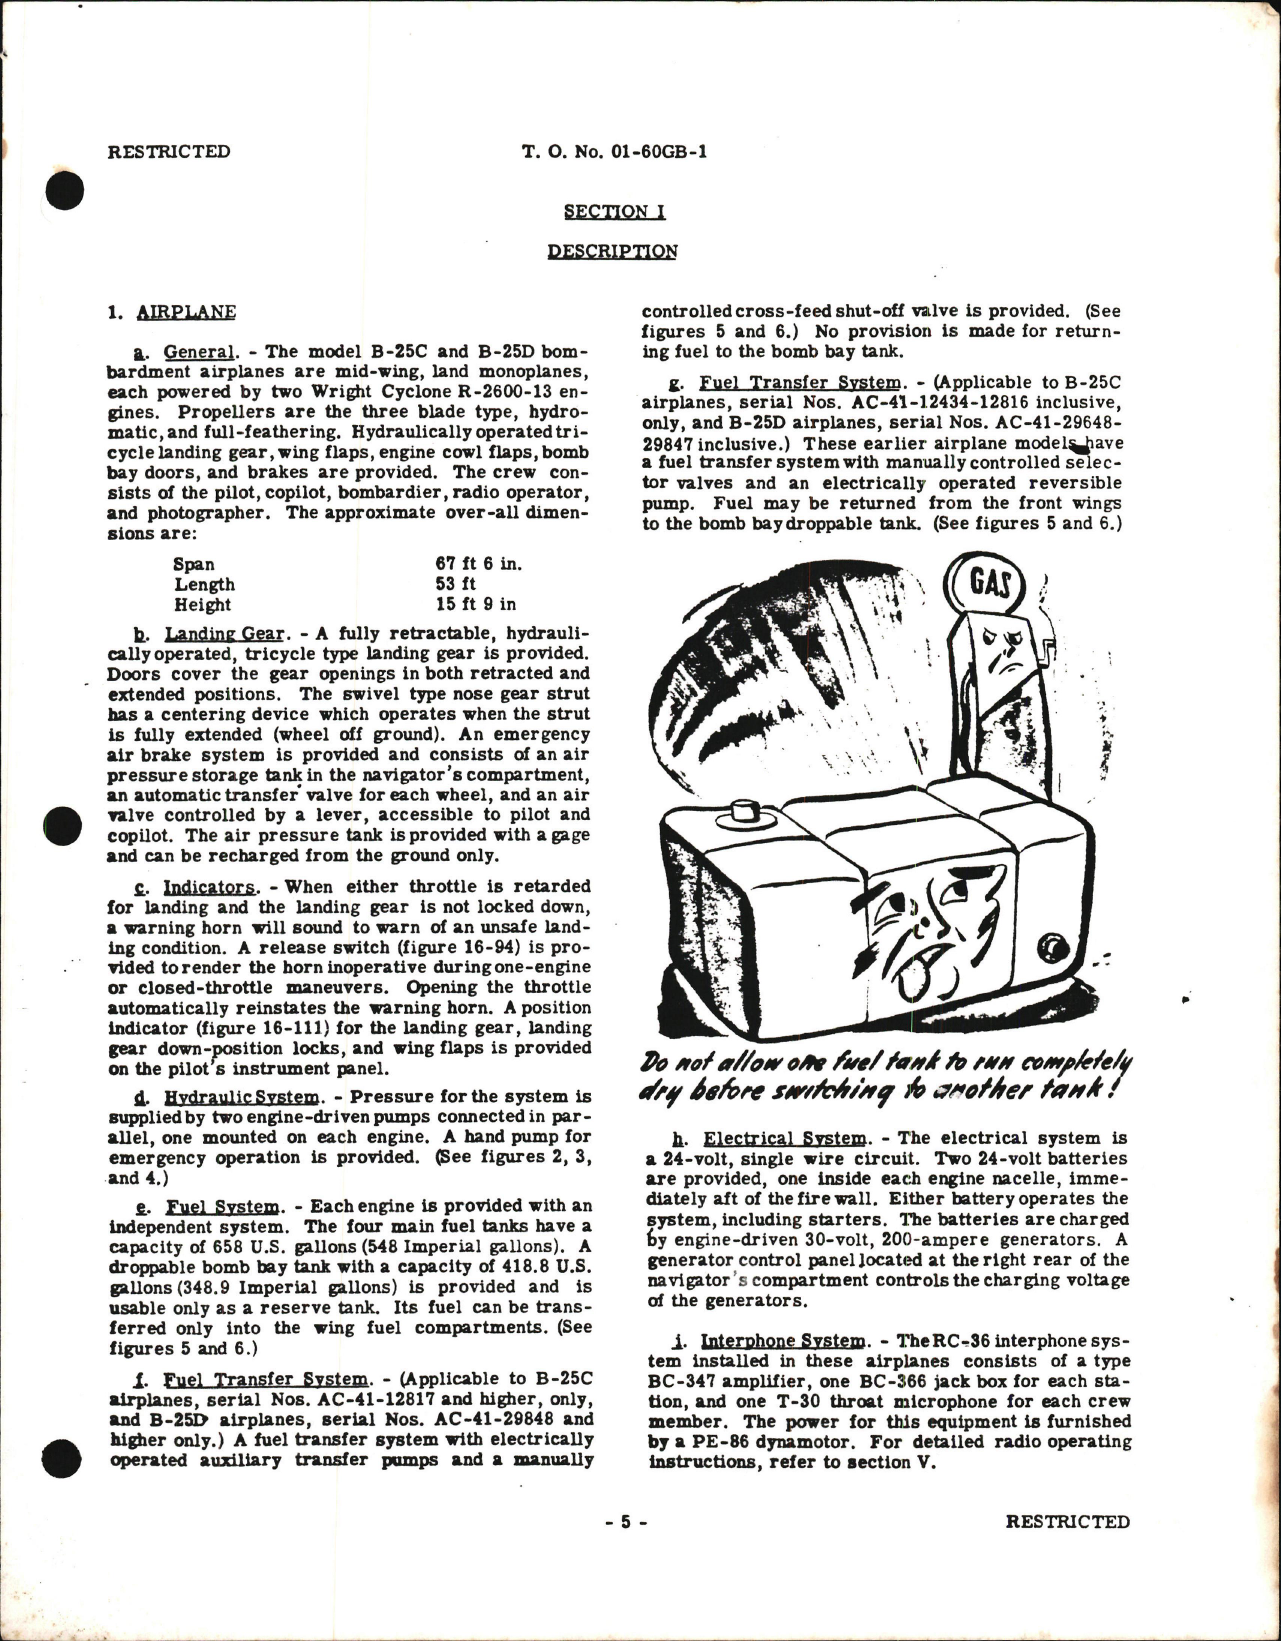 Sample page 7 from AirCorps Library document: Pilot's Handbook of Flight Operating Instructions for B-25C and B-25D